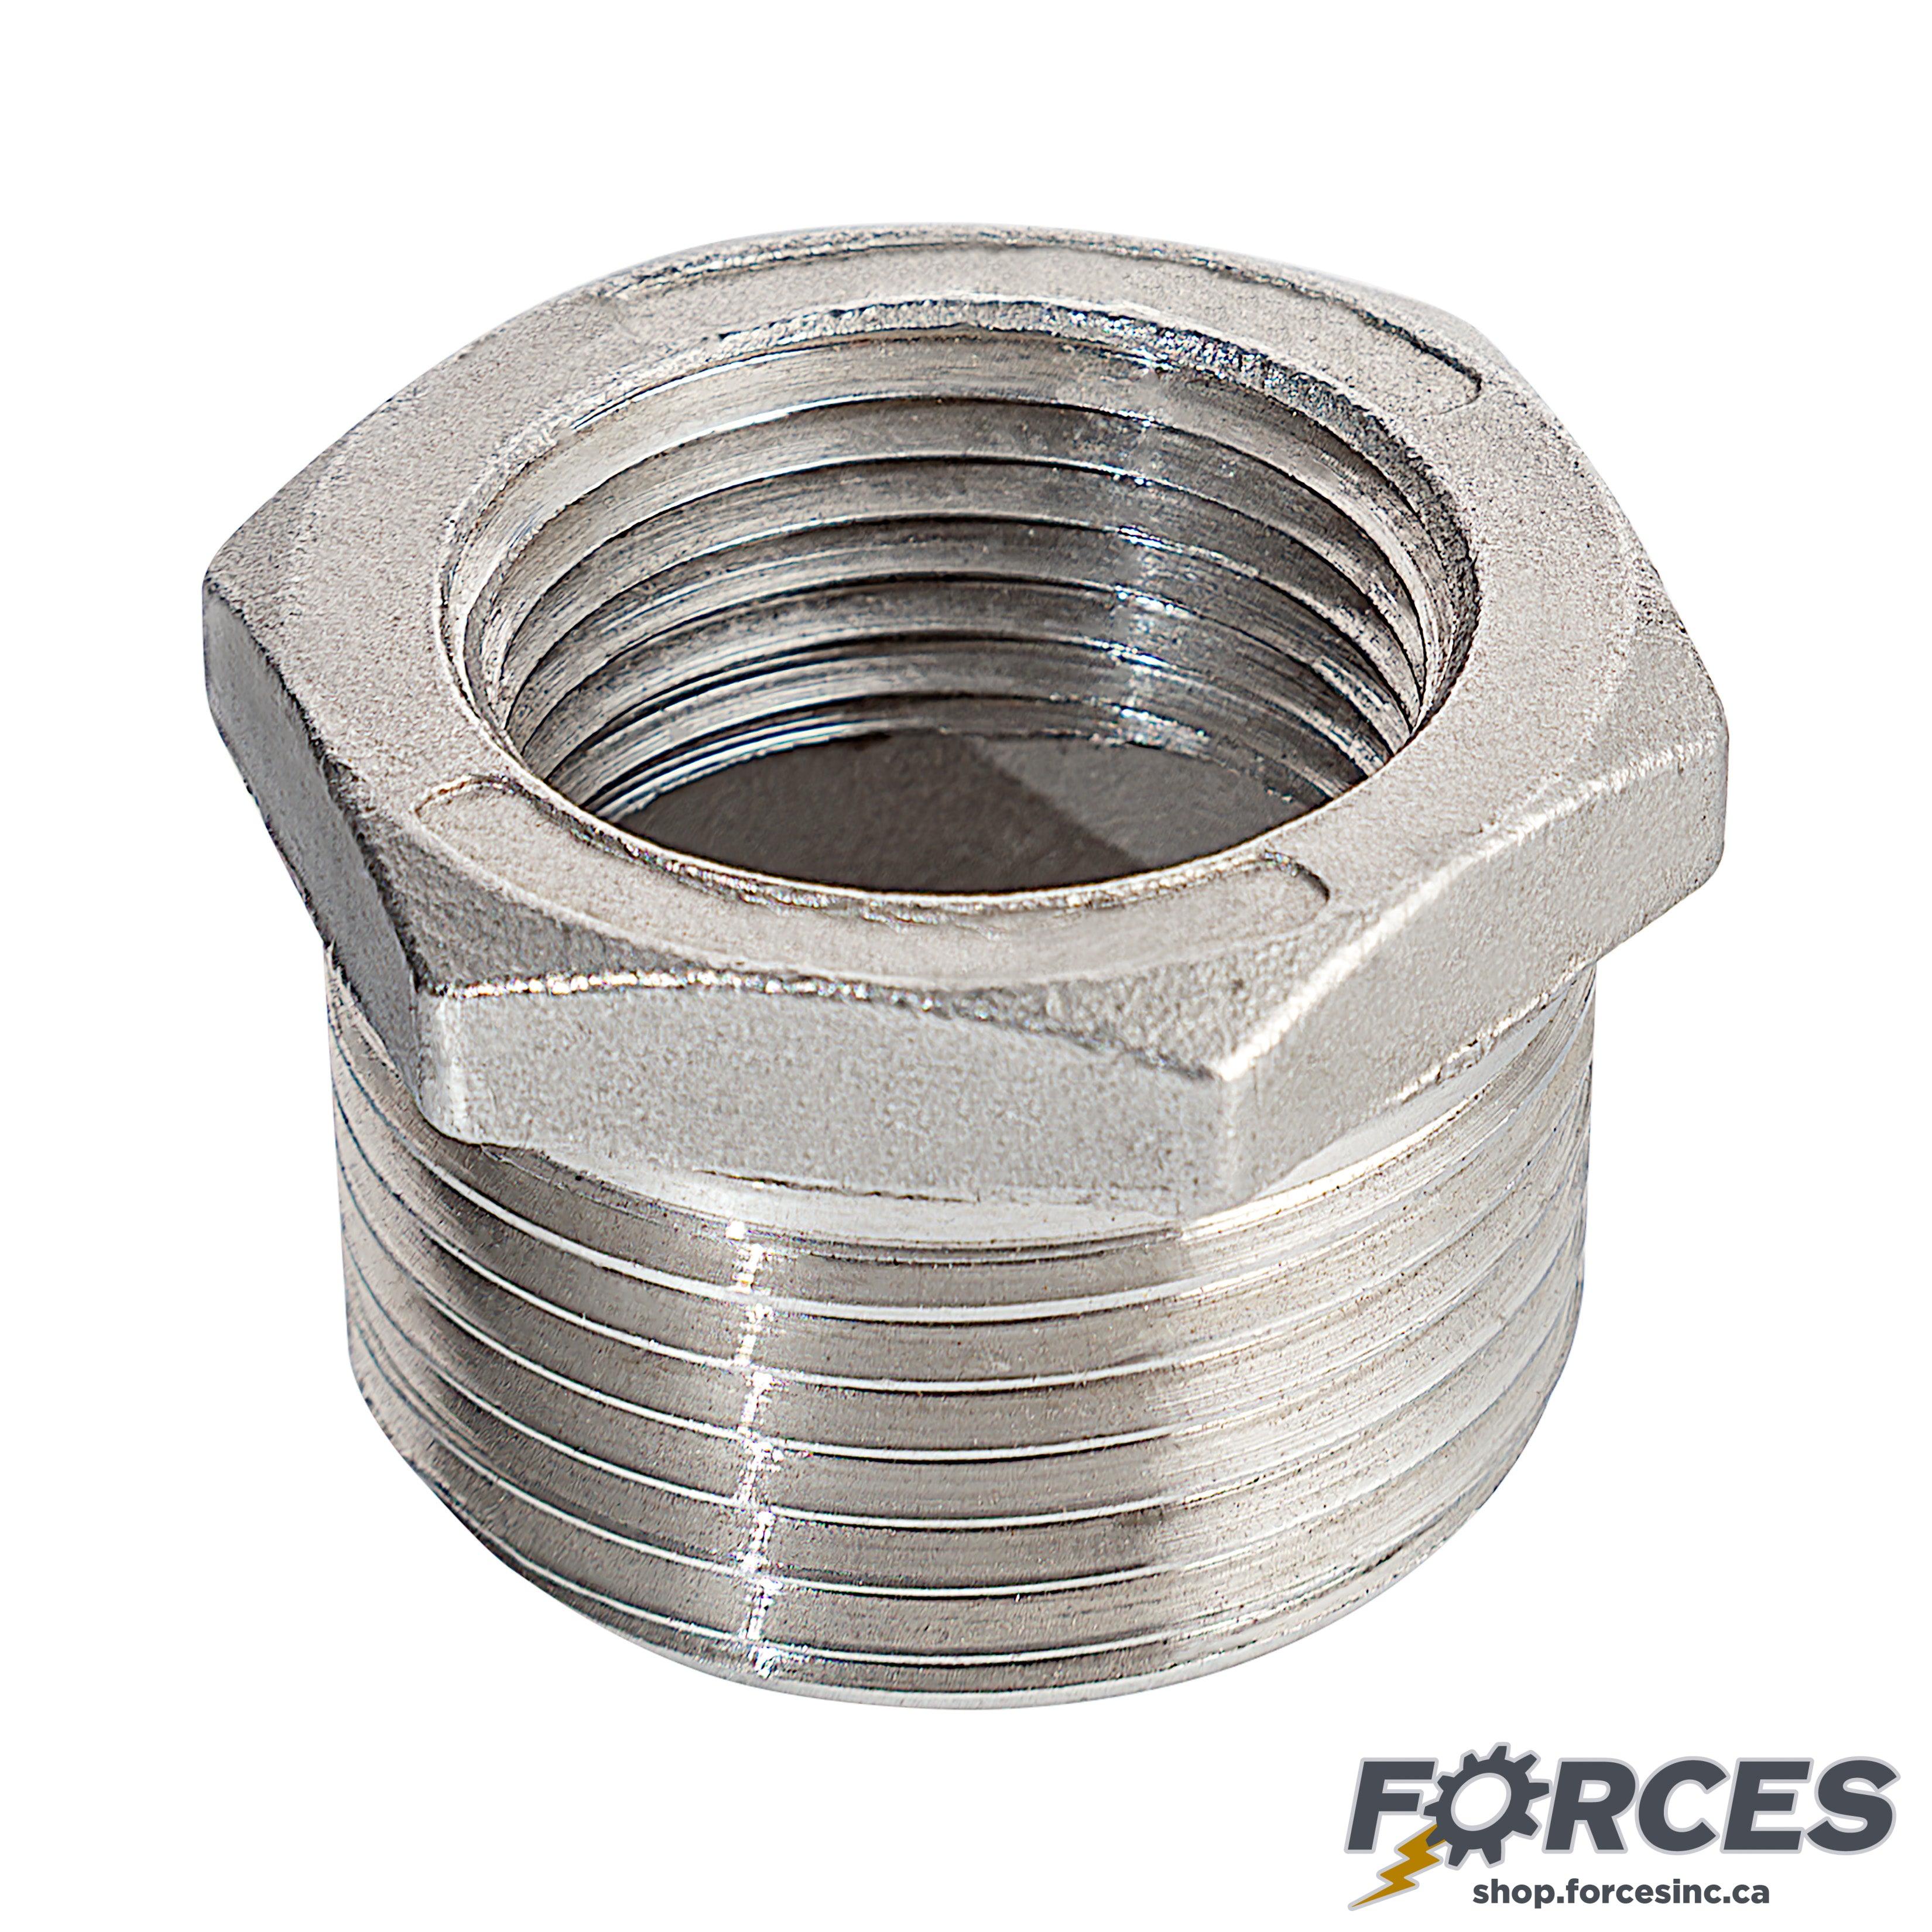 3/8" (M) x 1/4" (F) Reducing Hex Bushing NPT #150 - Stainless Steel 316 - Forces Inc